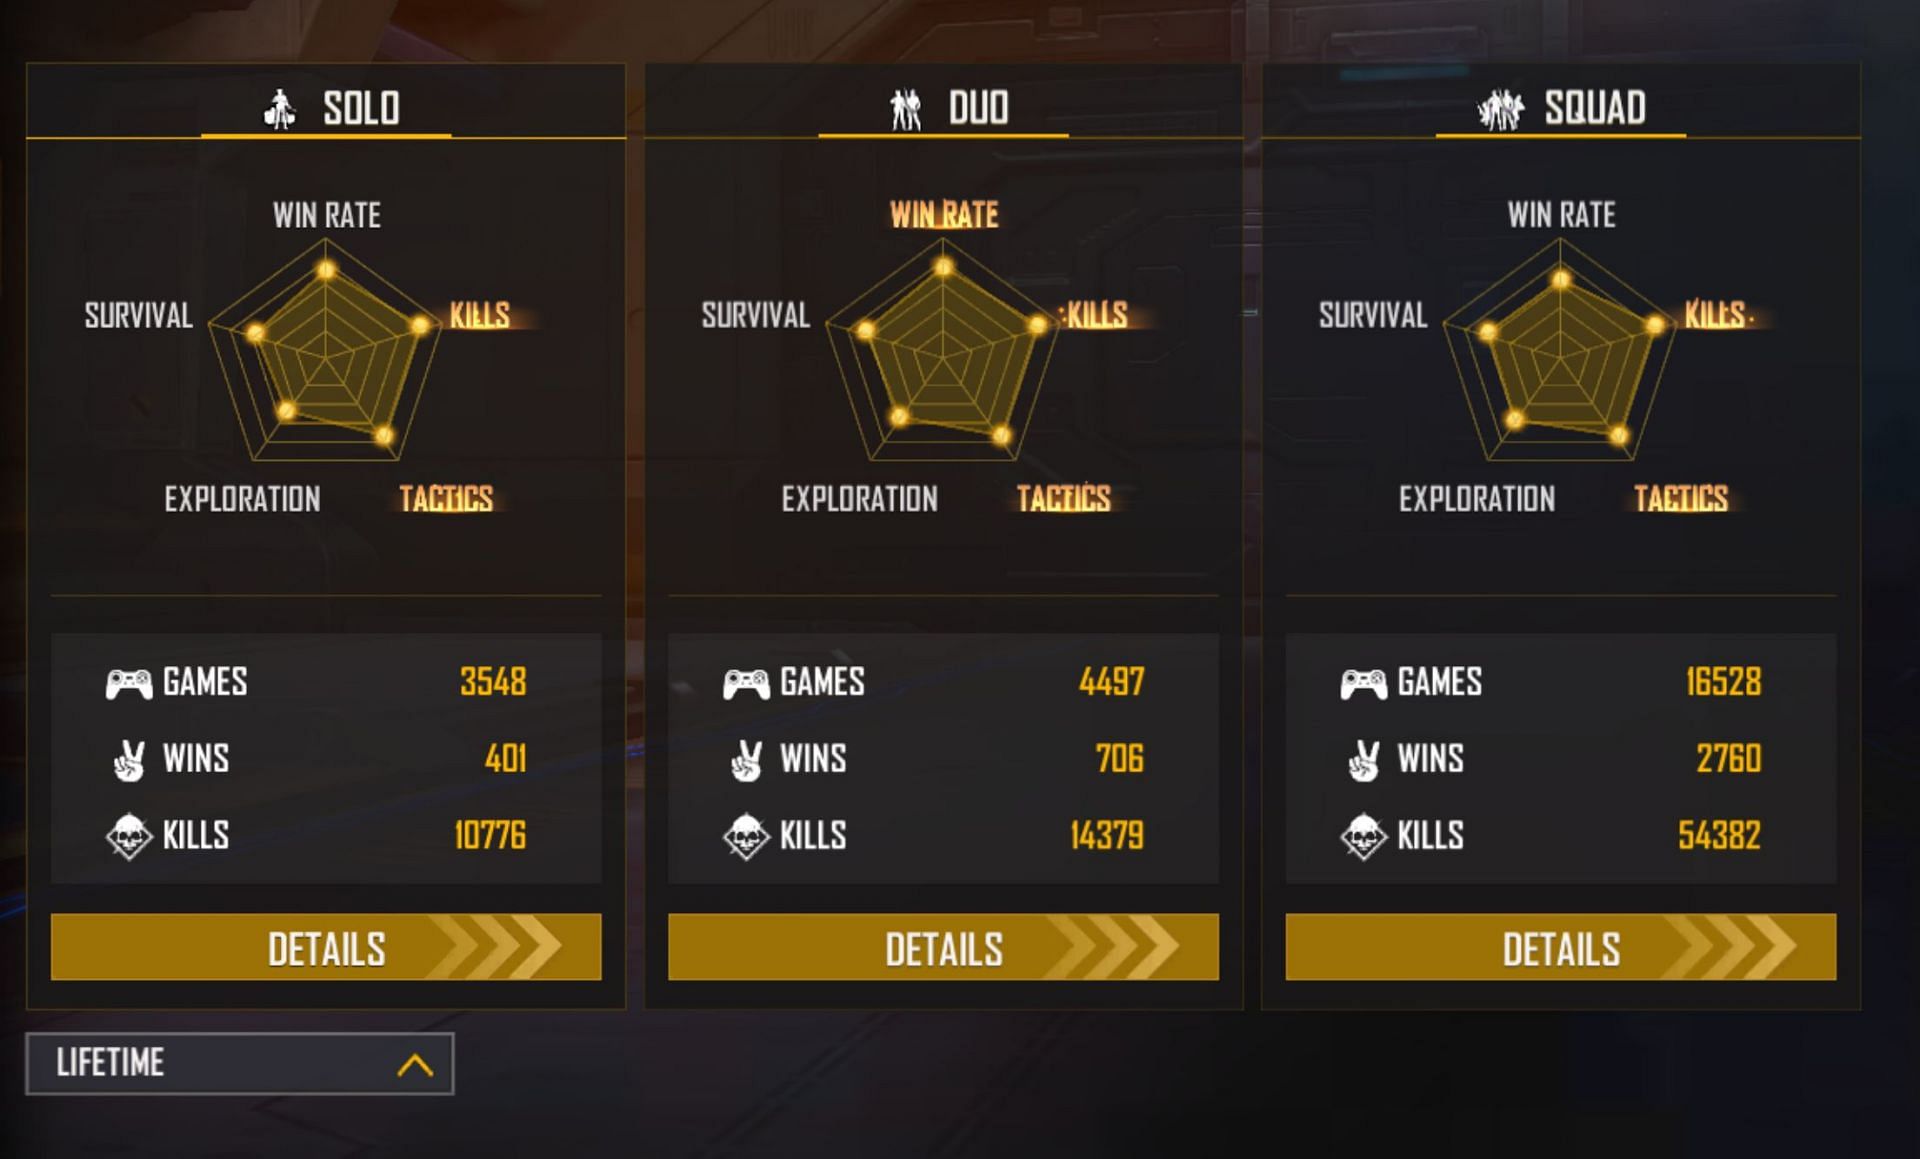 The YouTuber has recorded 54k frags in the squad mode (Image via Garena)